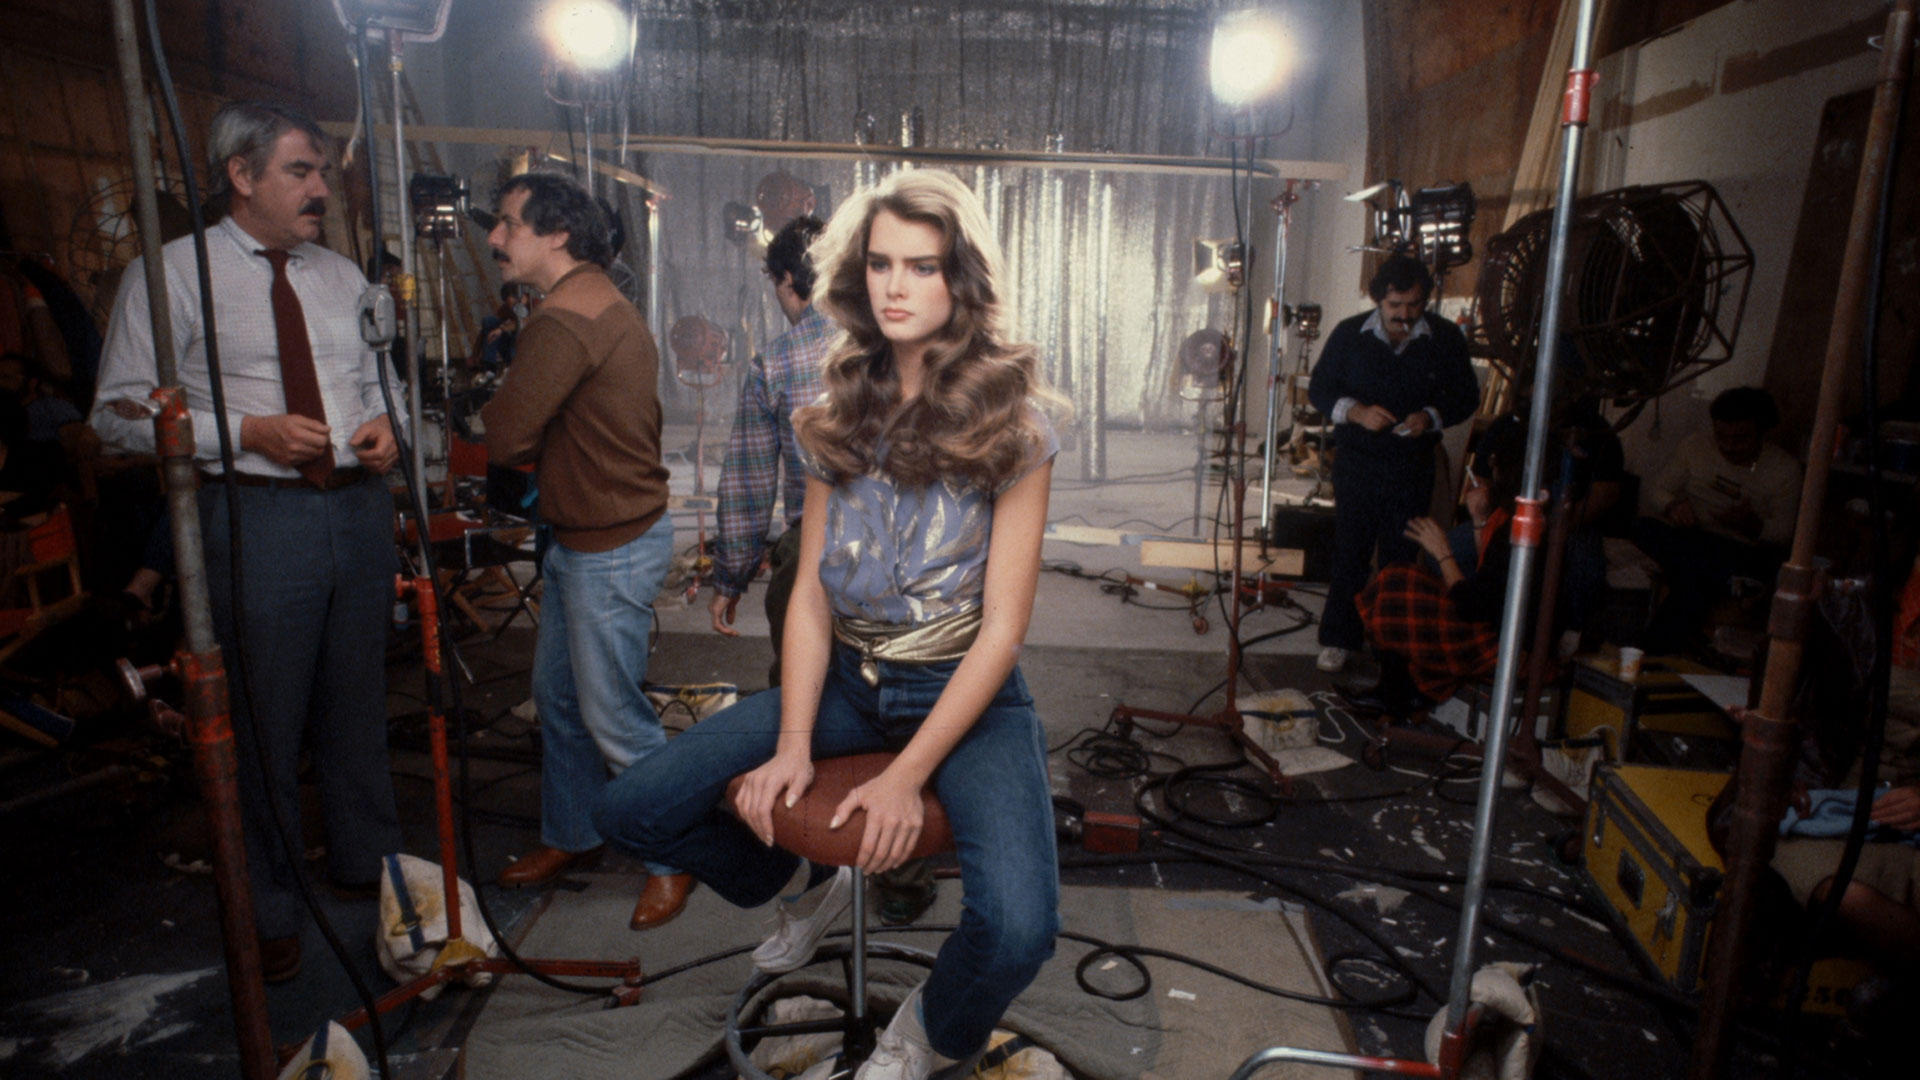 Brooke Shields appears in Pretty Baby: Brooke Shields by Lana Wilson, an official selection of the Premiers Program at the 2023 Sundance Film Festival. Courtesy of Sundance Institute | photo by Getty 